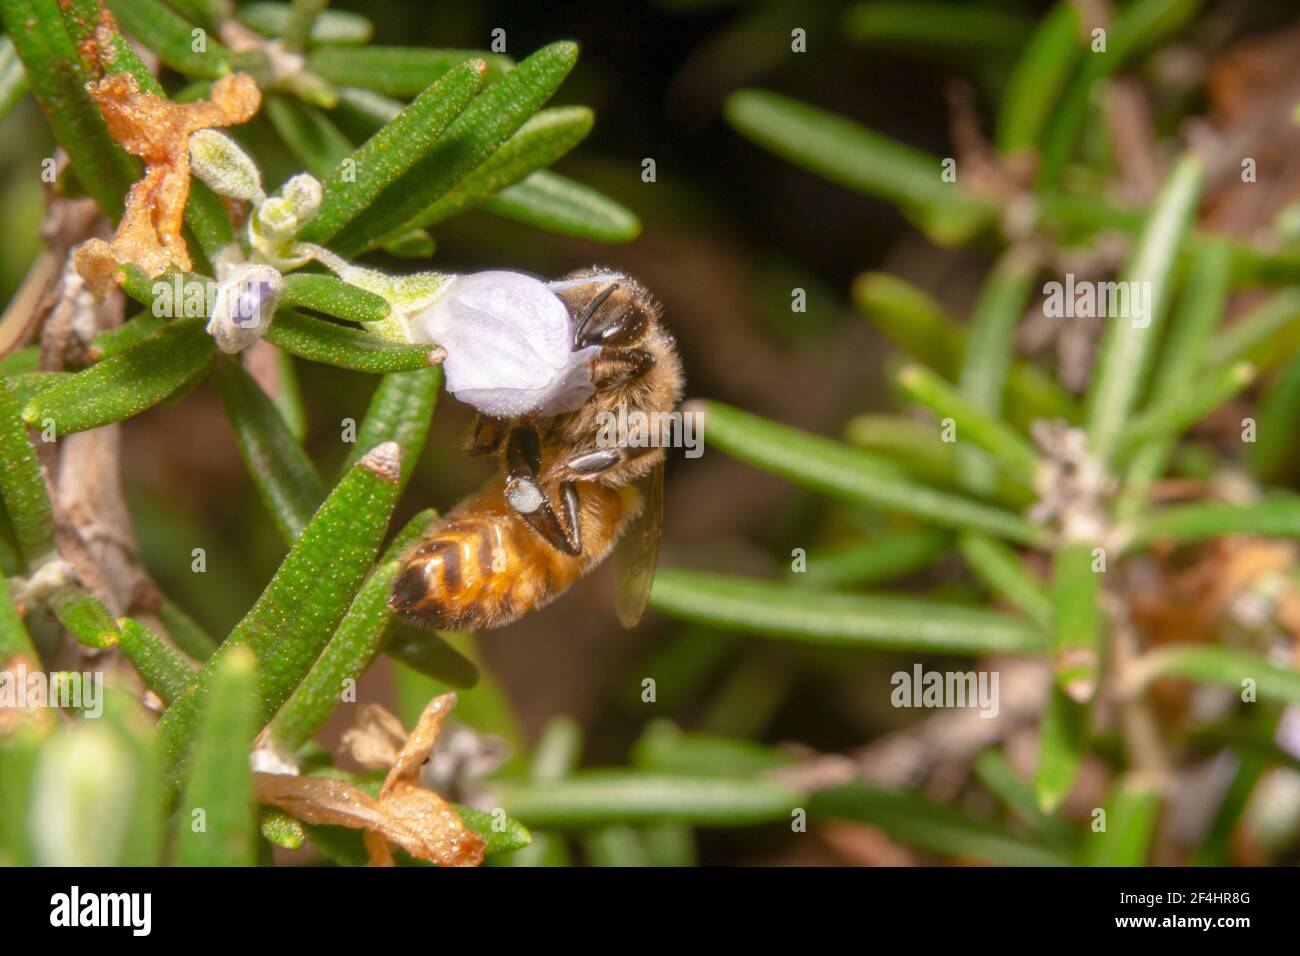 Curvy honey bee with its face inside a white flower Stock Photo